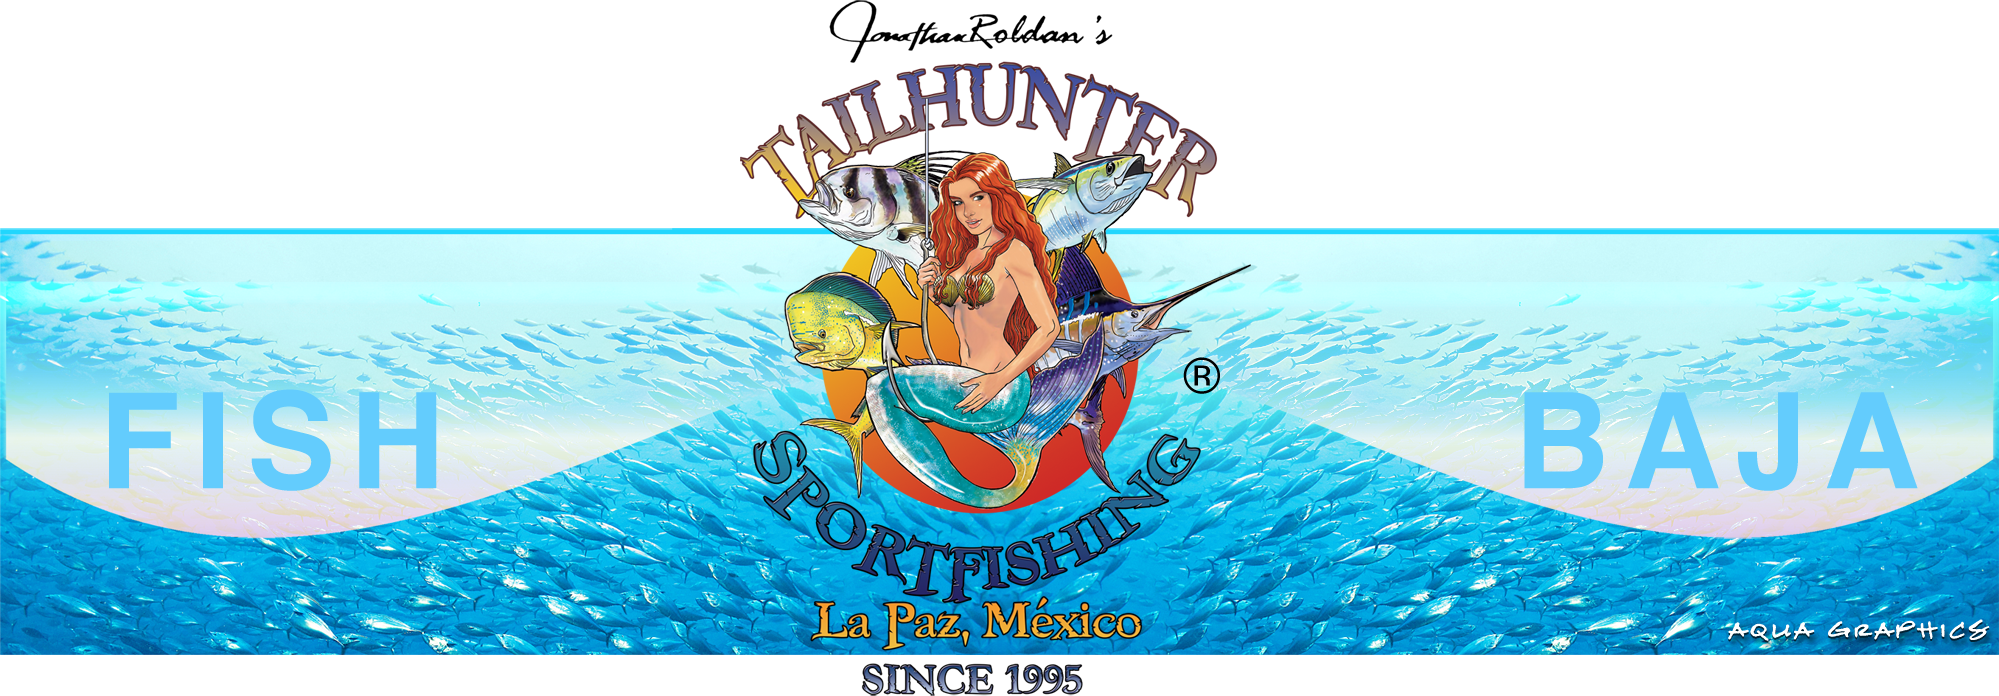 La Paz Fishing .. Sea of Cortez Fishing Charter Packages ... Best Rated Full Service Sport Fishing Outfitter...Tailhunter Sportfishing • Hotel & Fishing Charter Packages ... We Supply All The Fishing Gear You'll Need ...Complete Service Outfitter in La Paz, Baja California